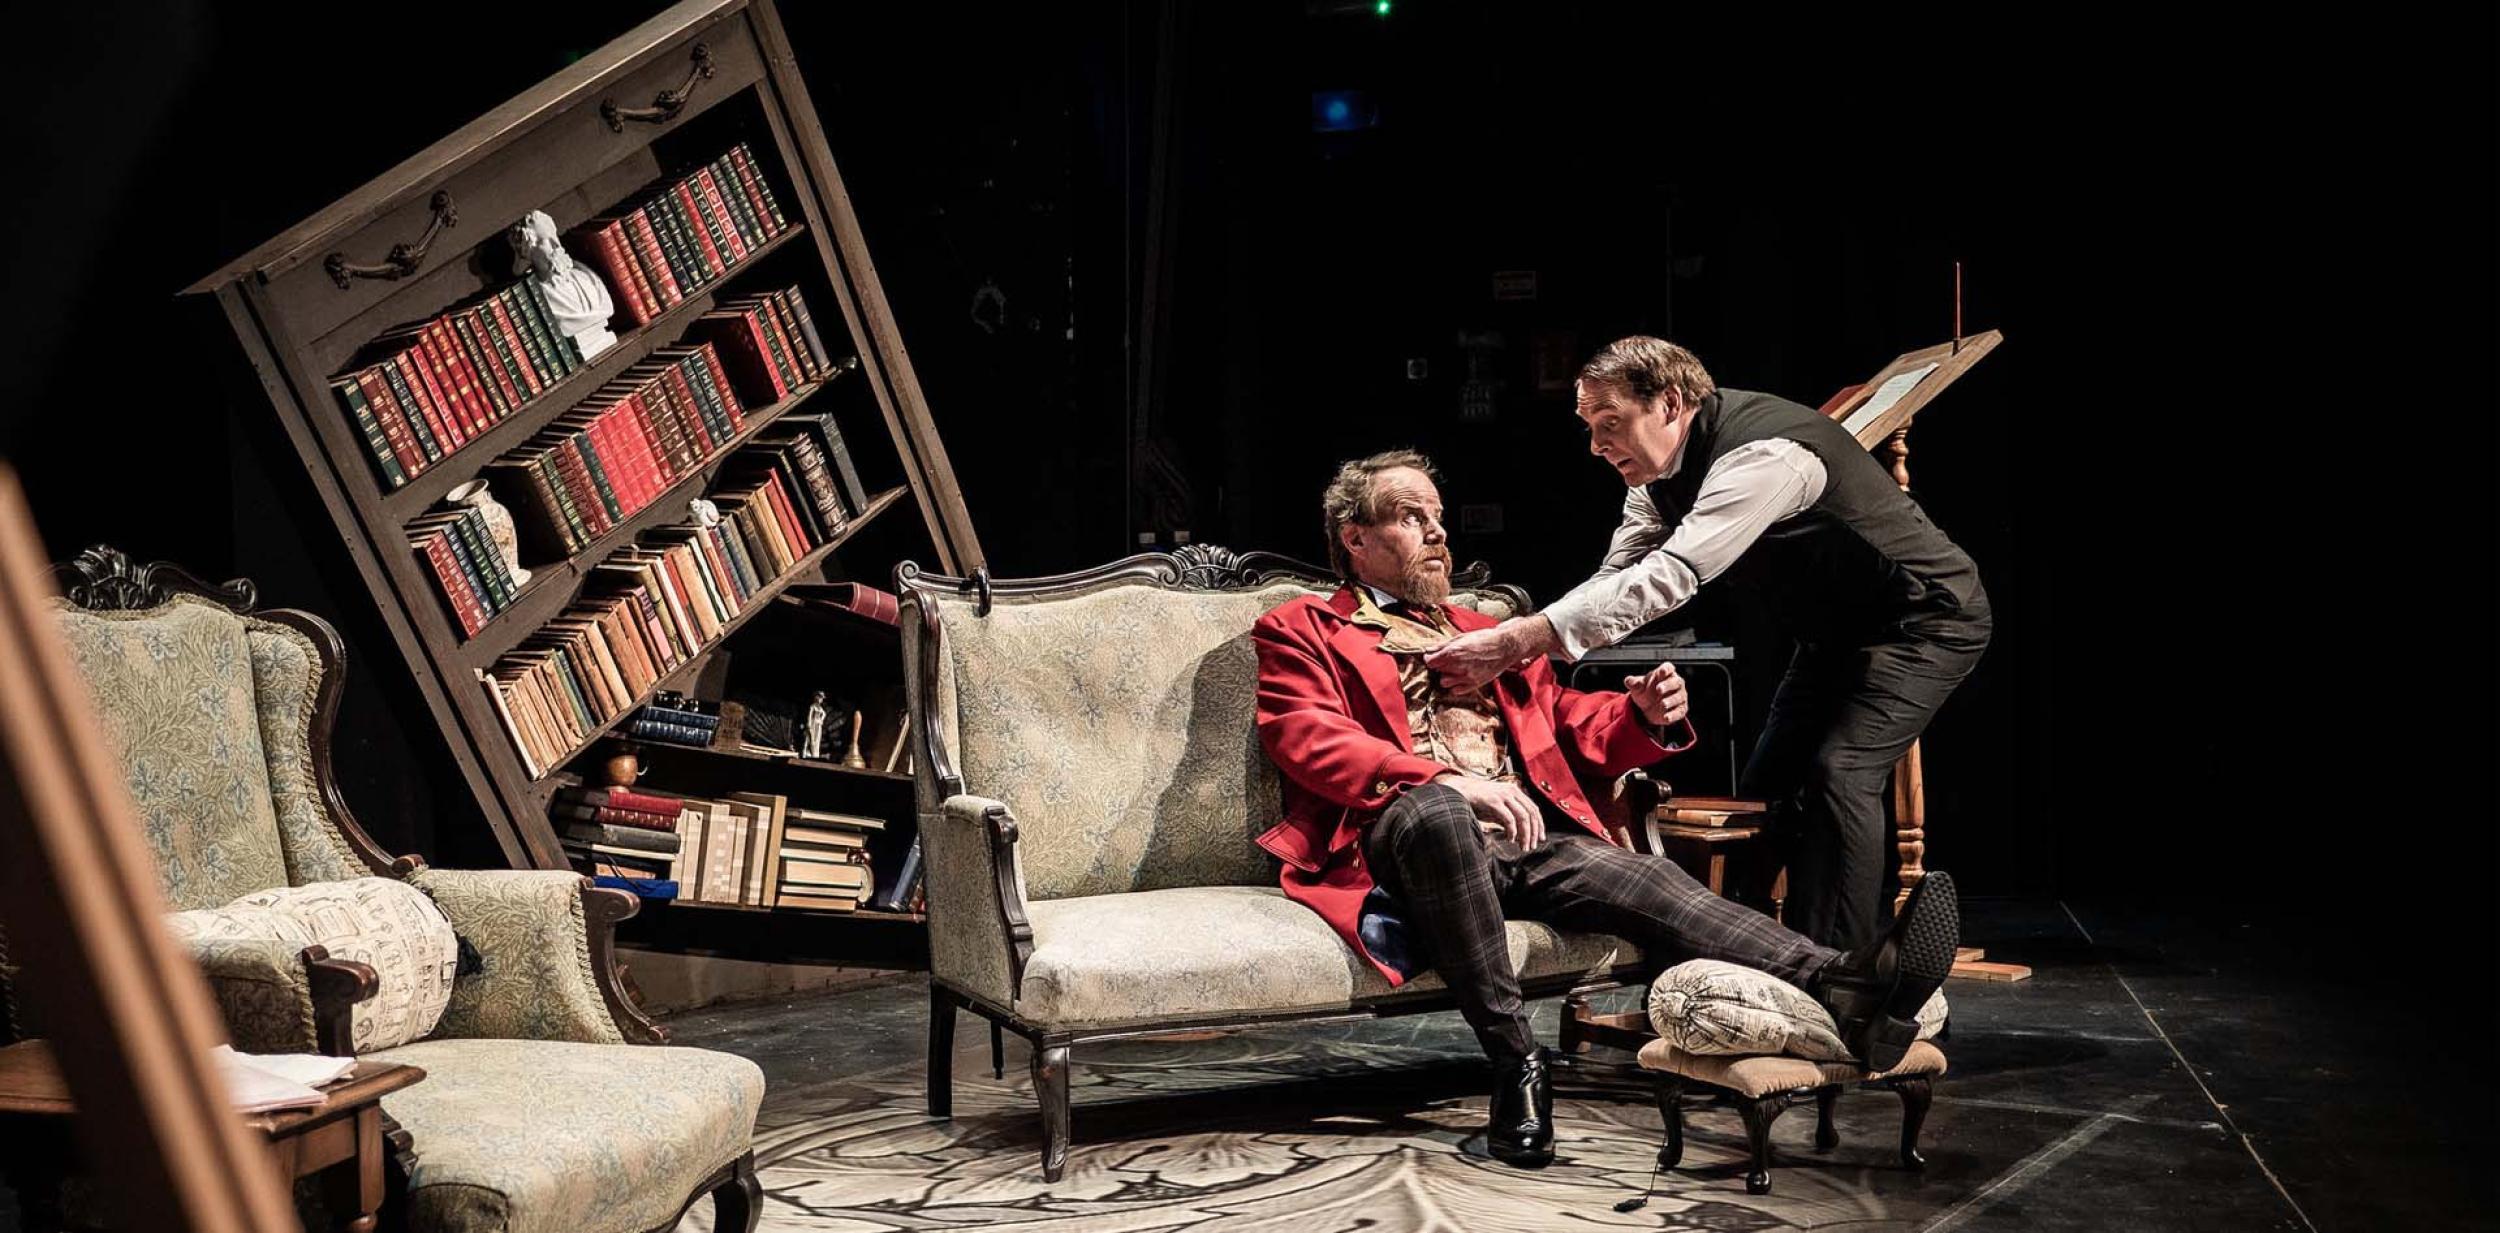 Two actors on stage, one on a sofa the other standing, in front of a wonky bookcase